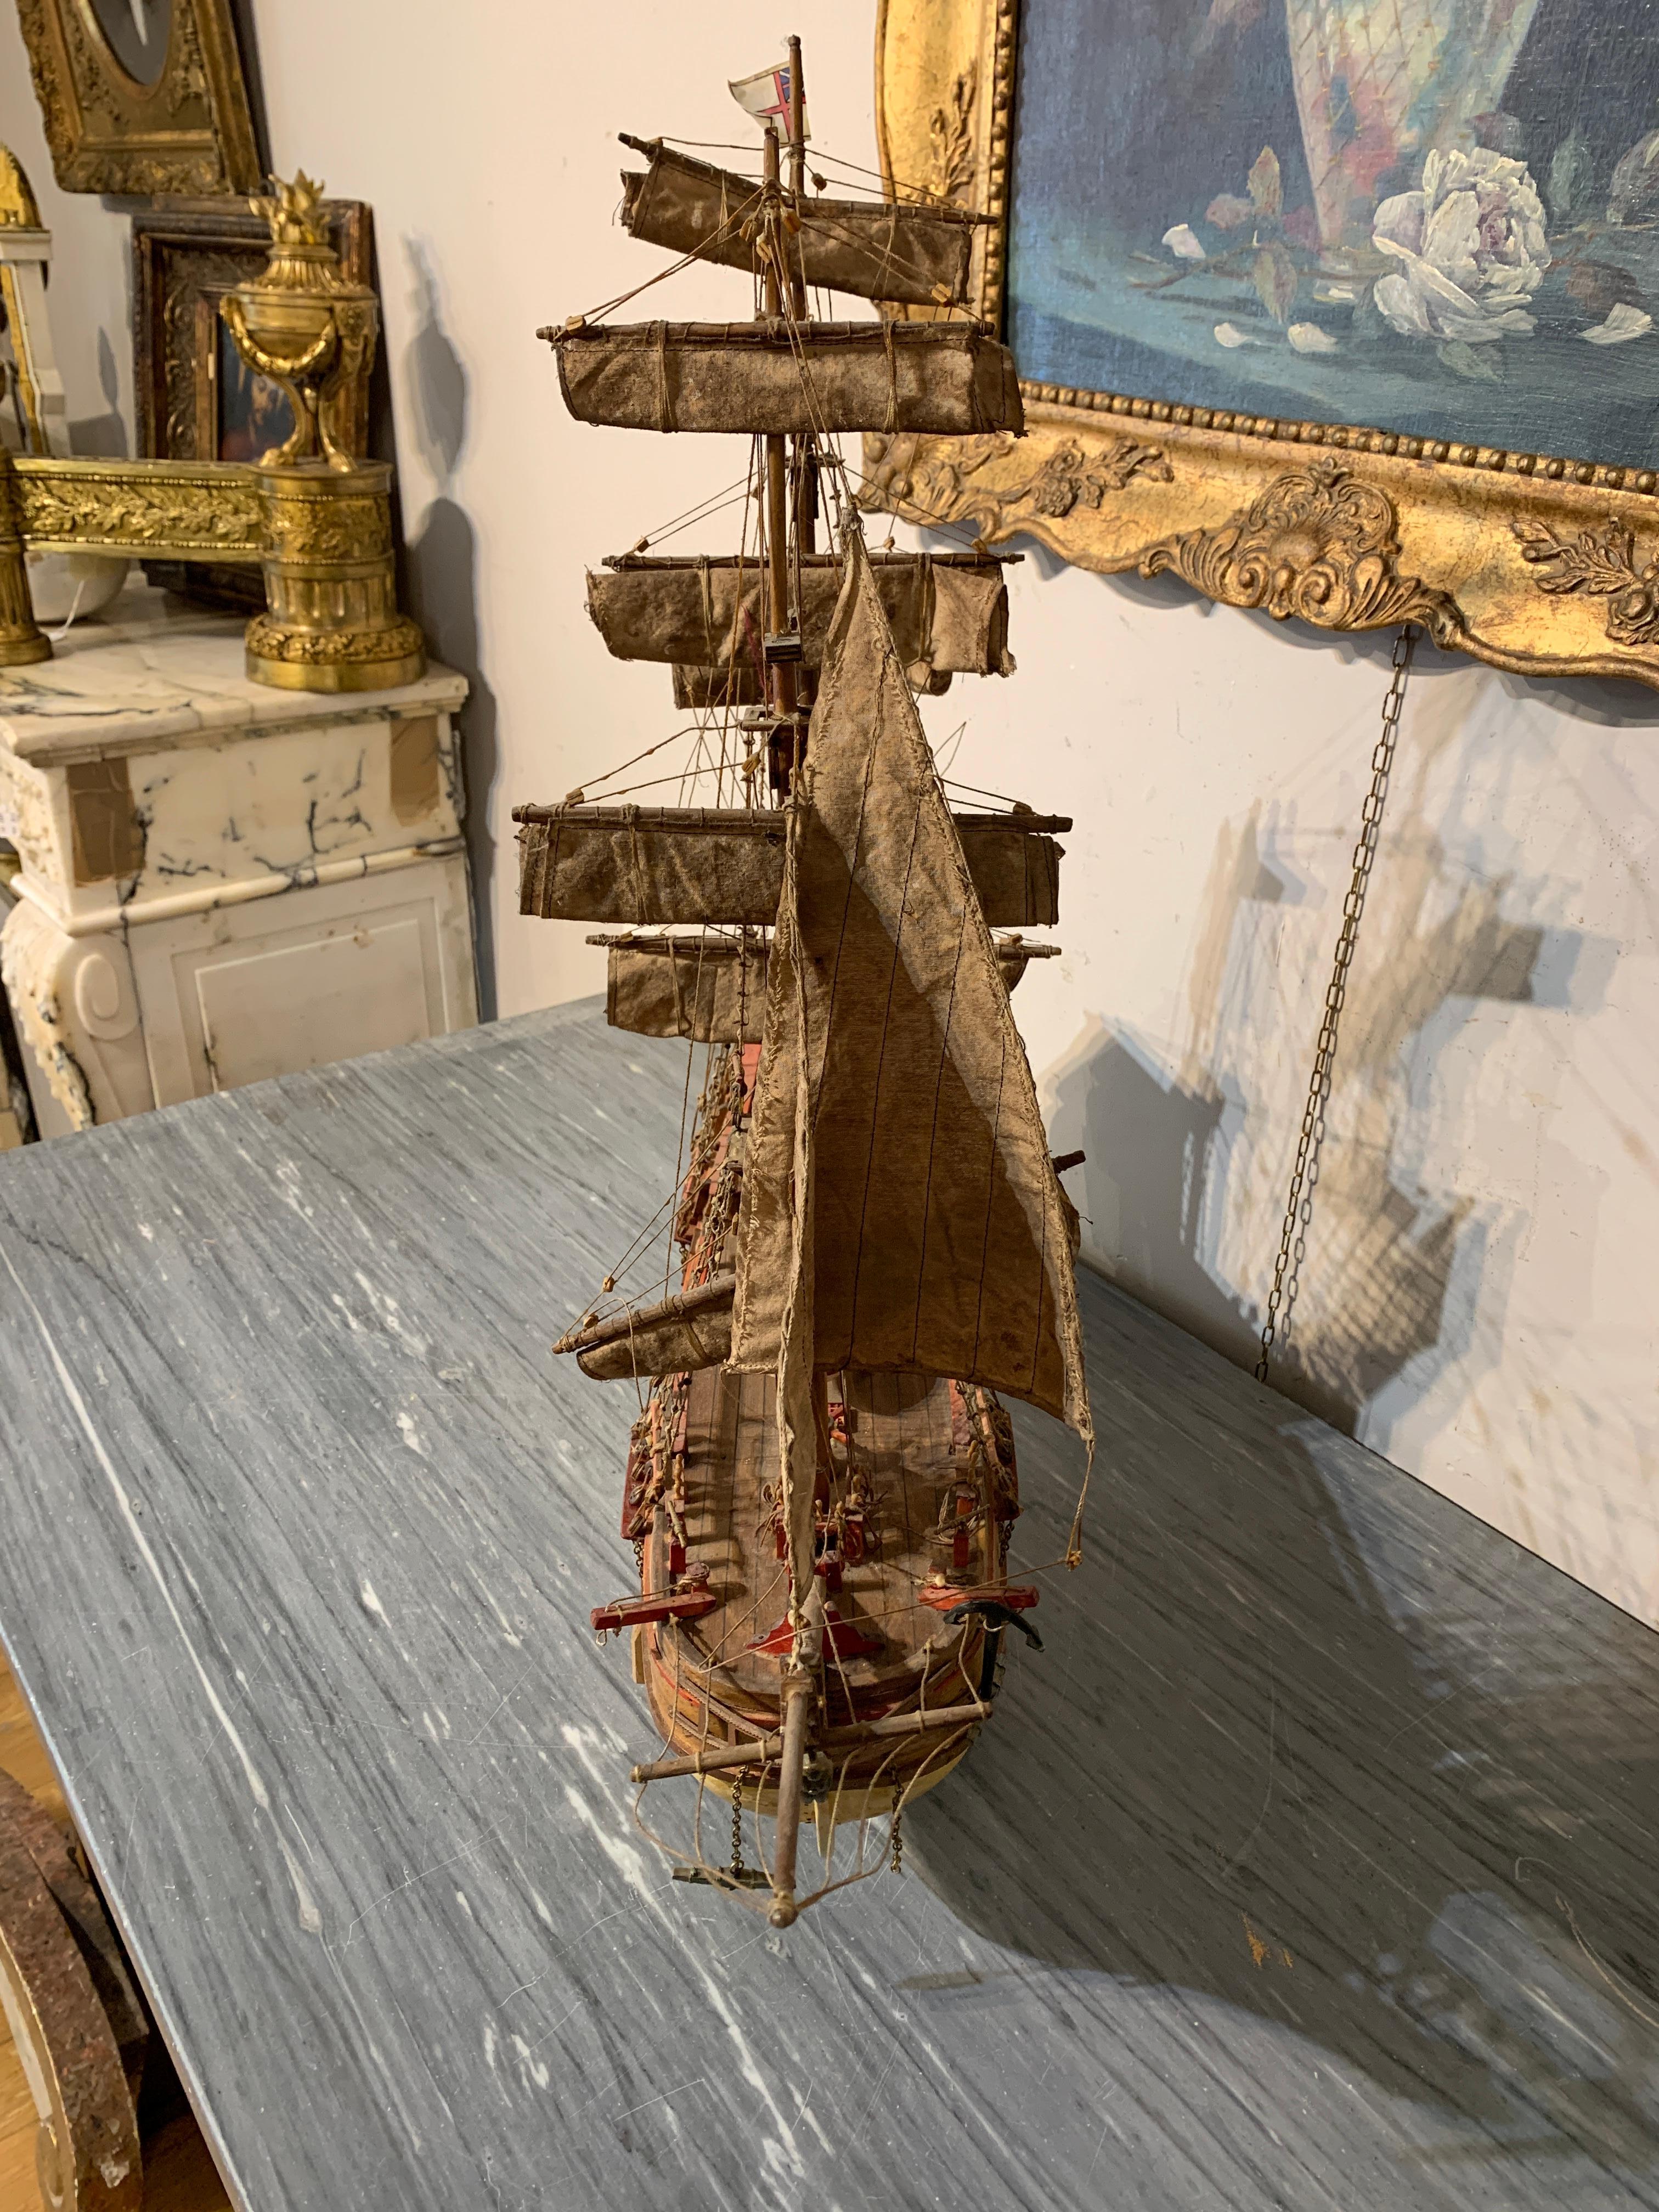 EARLY 20th CENTURY SAILING SHIP MODEL For Sale 6